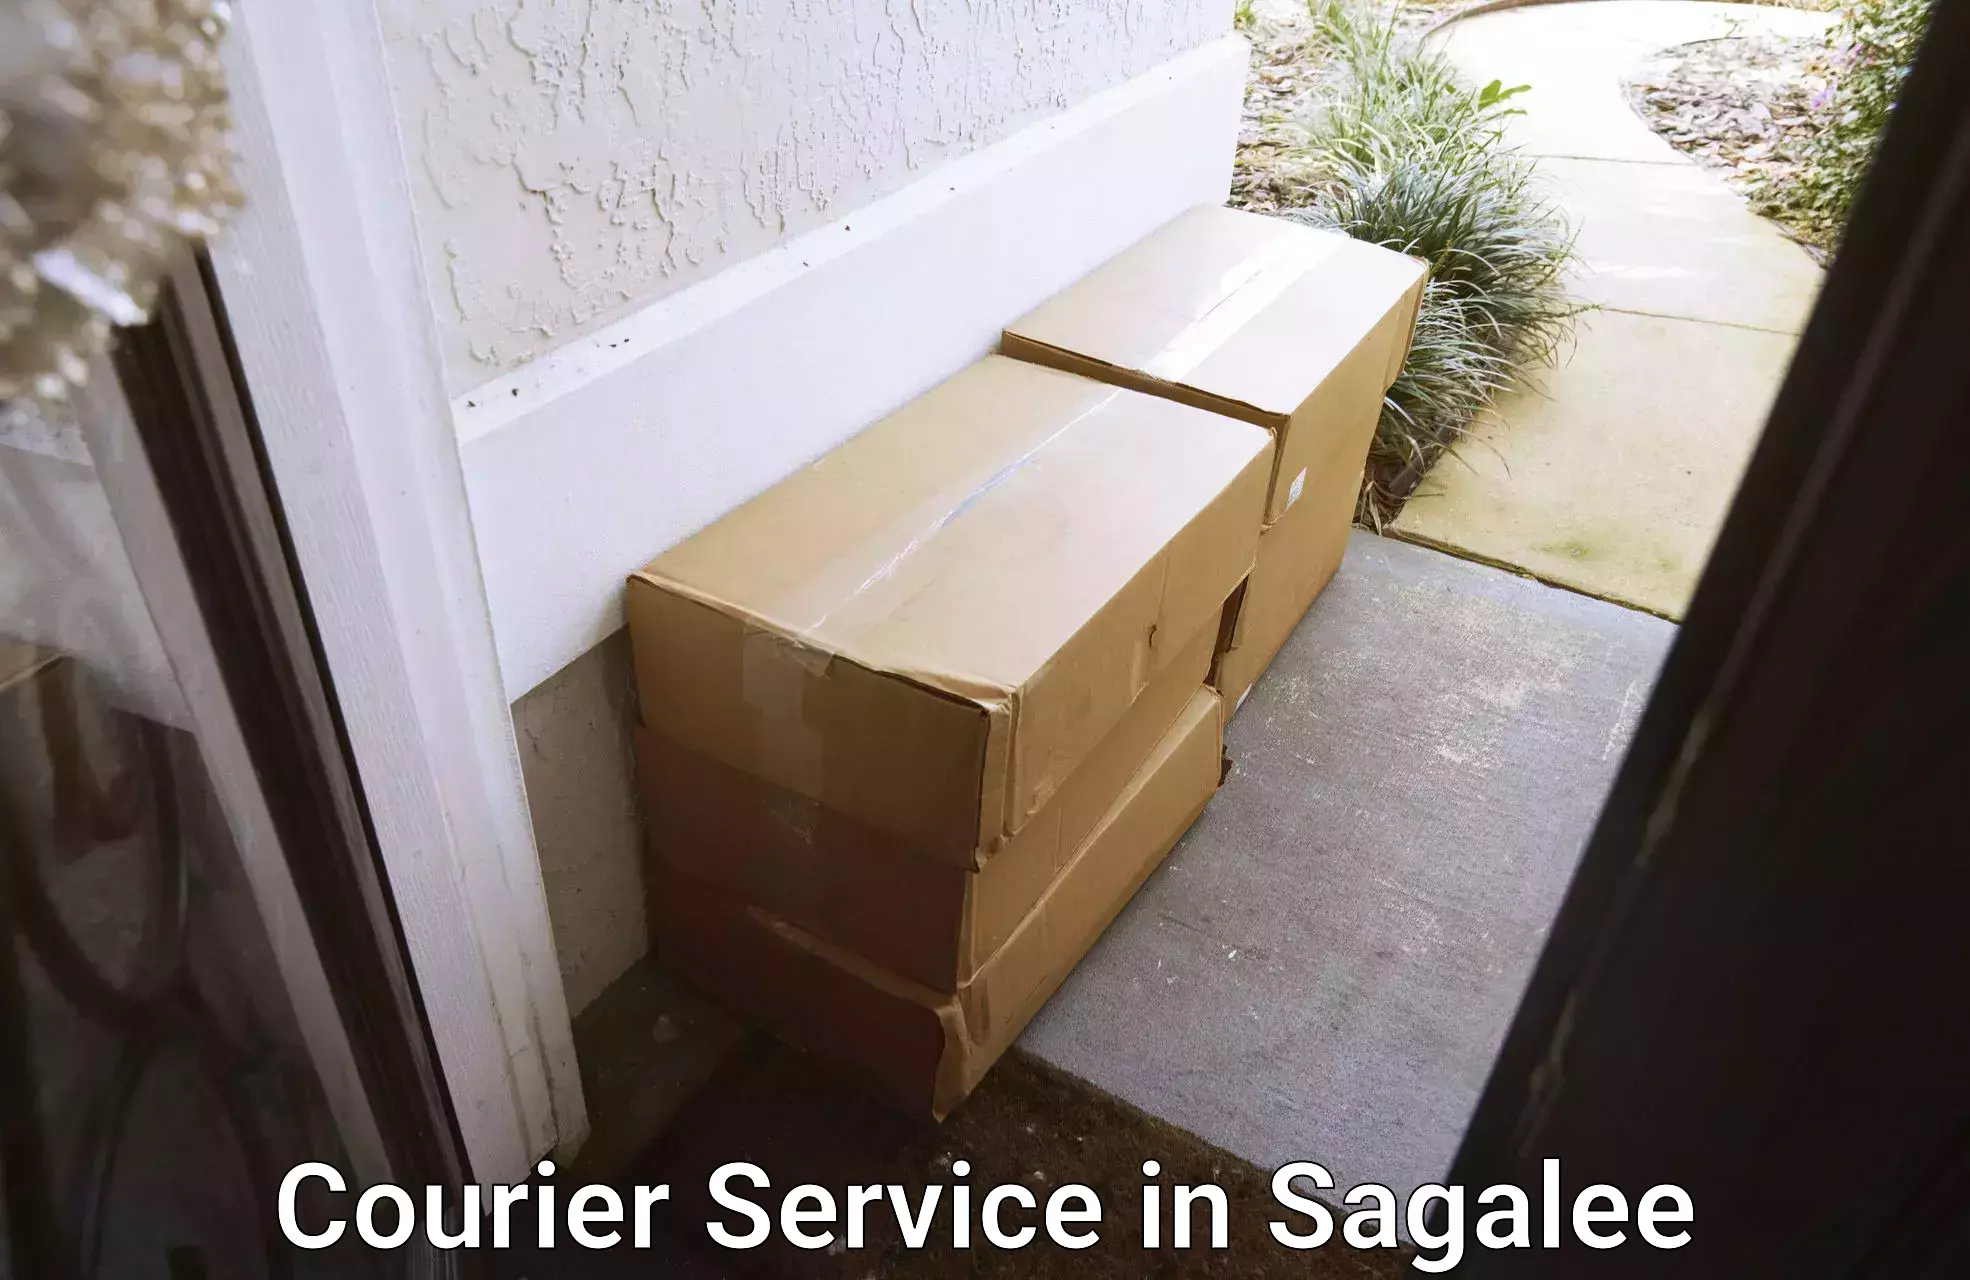 Enhanced delivery experience in Sagalee